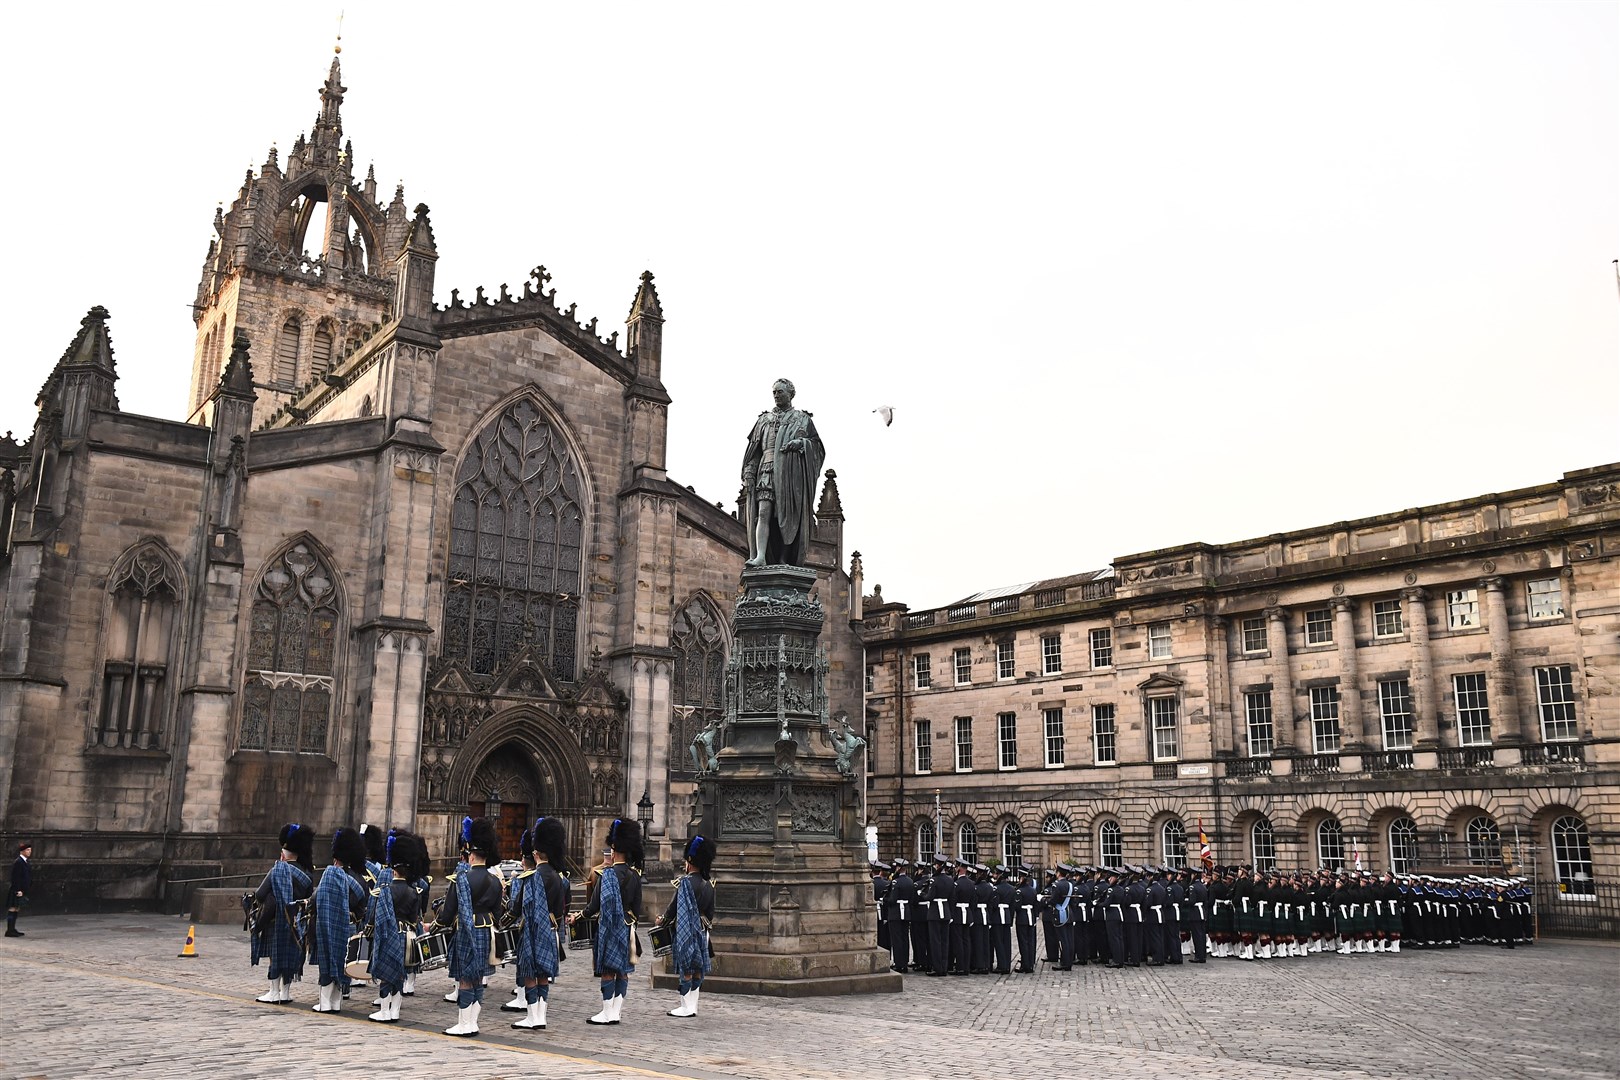 The service will be held at St Giles’ Cathedral in Edinburgh where rehearsals were held outside on Monday (Euan Cherry/PA)